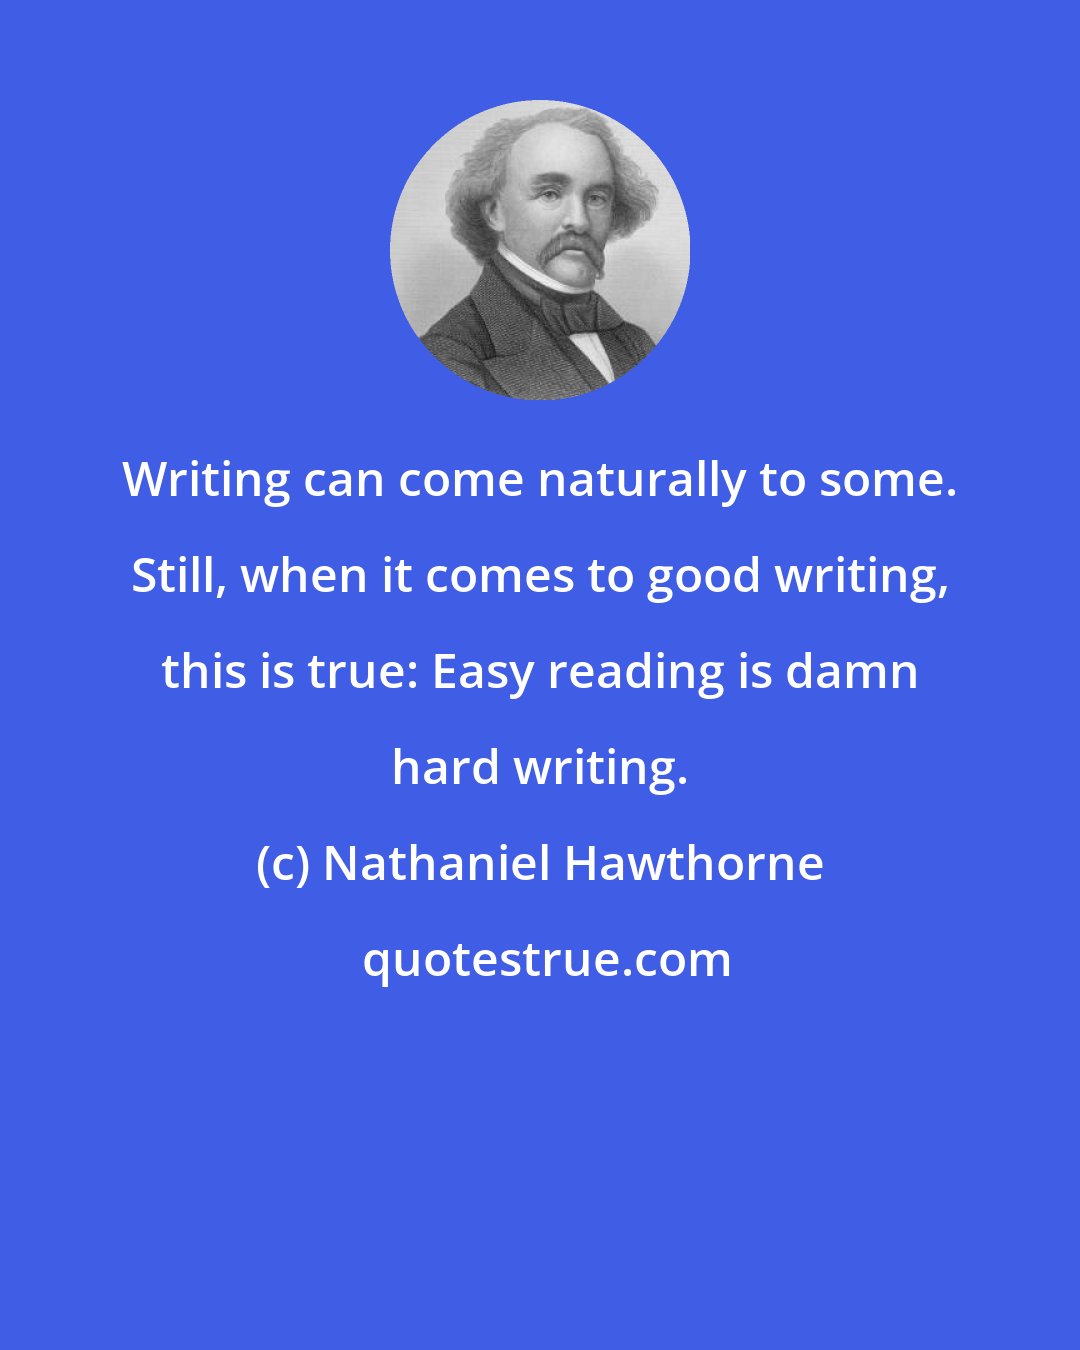 Nathaniel Hawthorne: Writing can come naturally to some. Still, when it comes to good writing, this is true: Easy reading is damn hard writing.